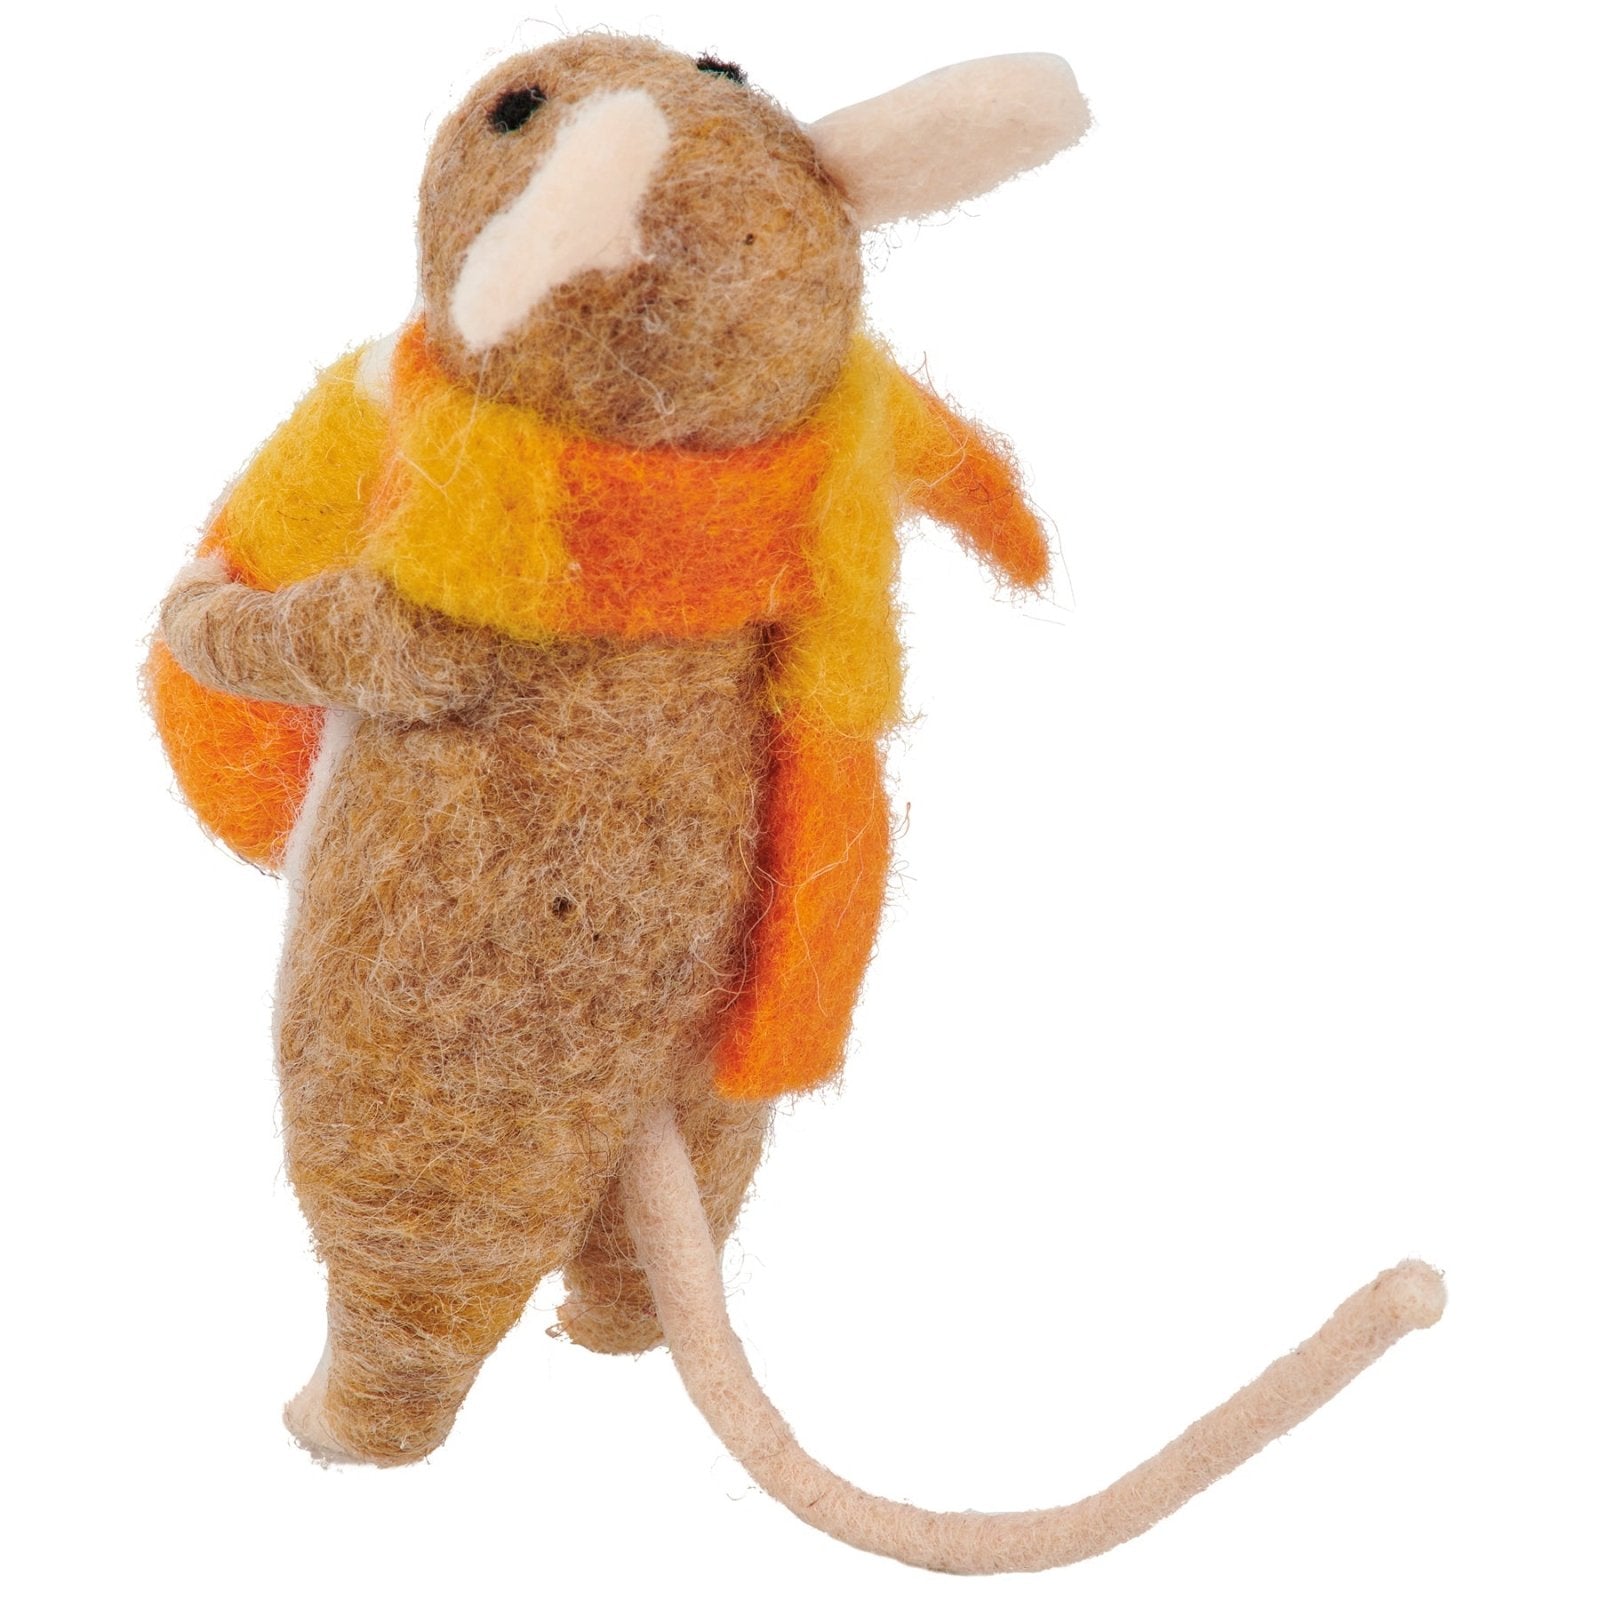 Primitive/Country Halloween Felt Candy Corn Mouse ornament - The Primitive Pineapple Collection